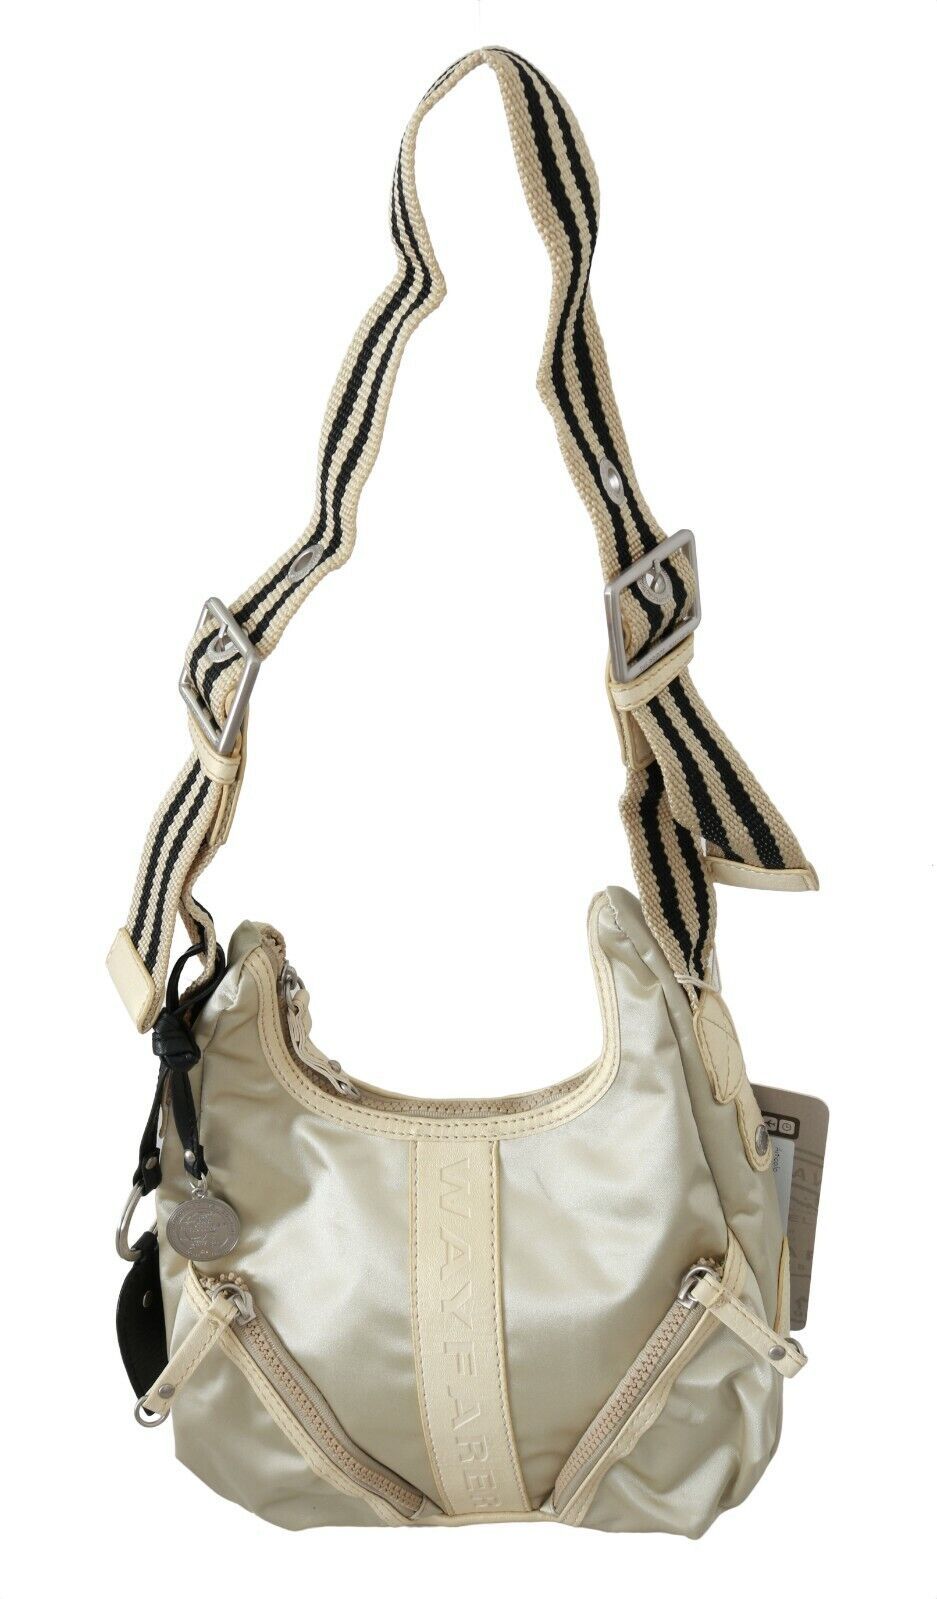 Chic White Fabric Shoulder Bag - Perfect for Any Occasion